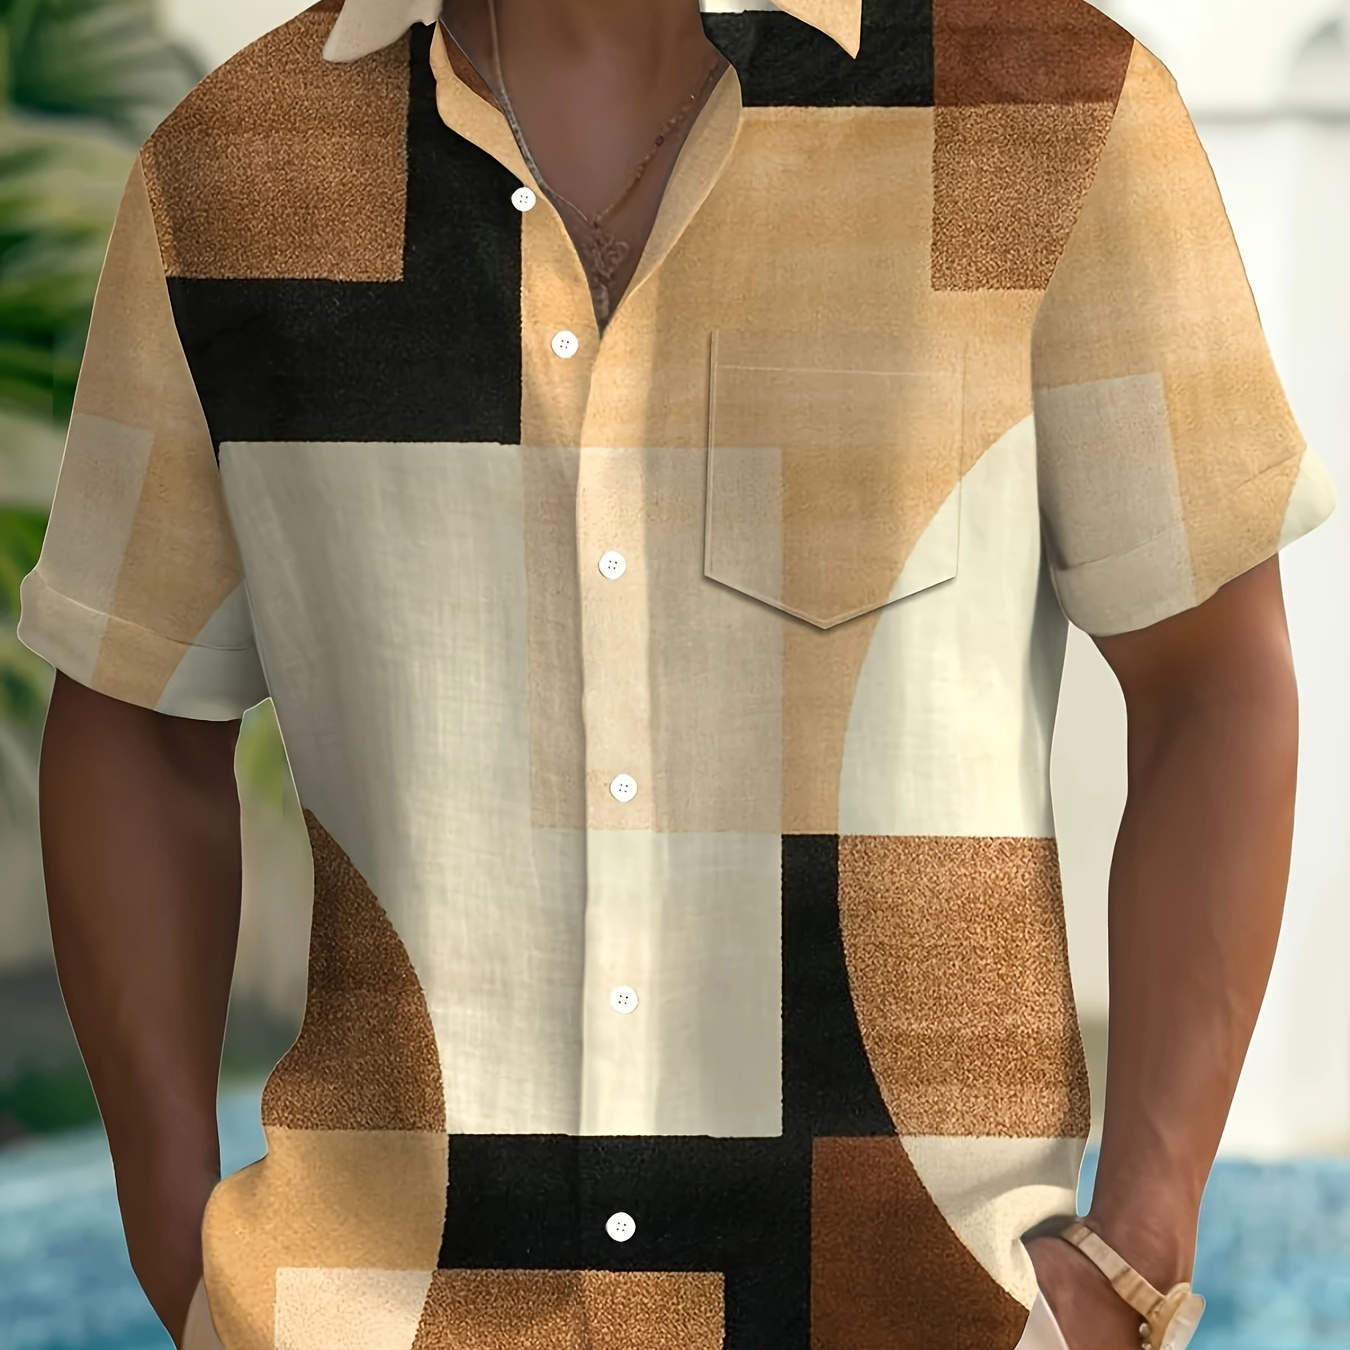 

Geometric Pattern Men's Fashionable And Simple Short Sleeve Button Casual Lapel Shirt, Trendy And Versatile, Suitable For Summer Dates, Beach Holiday, As Gifts, Men's Clothing